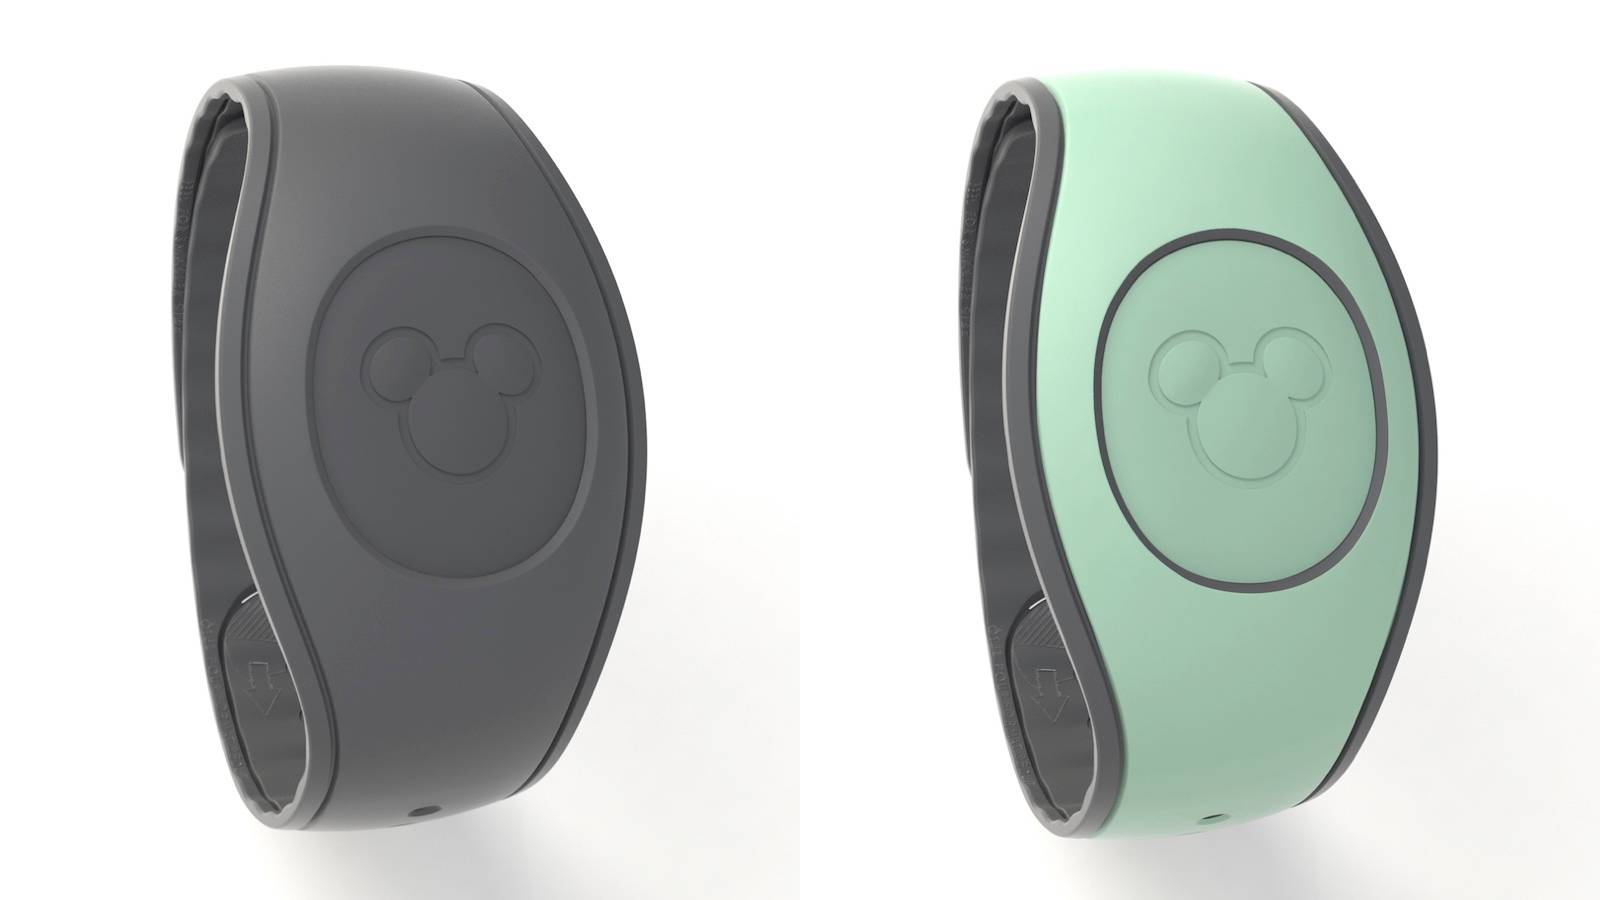 Dark Gray and Mint Green MagicBands